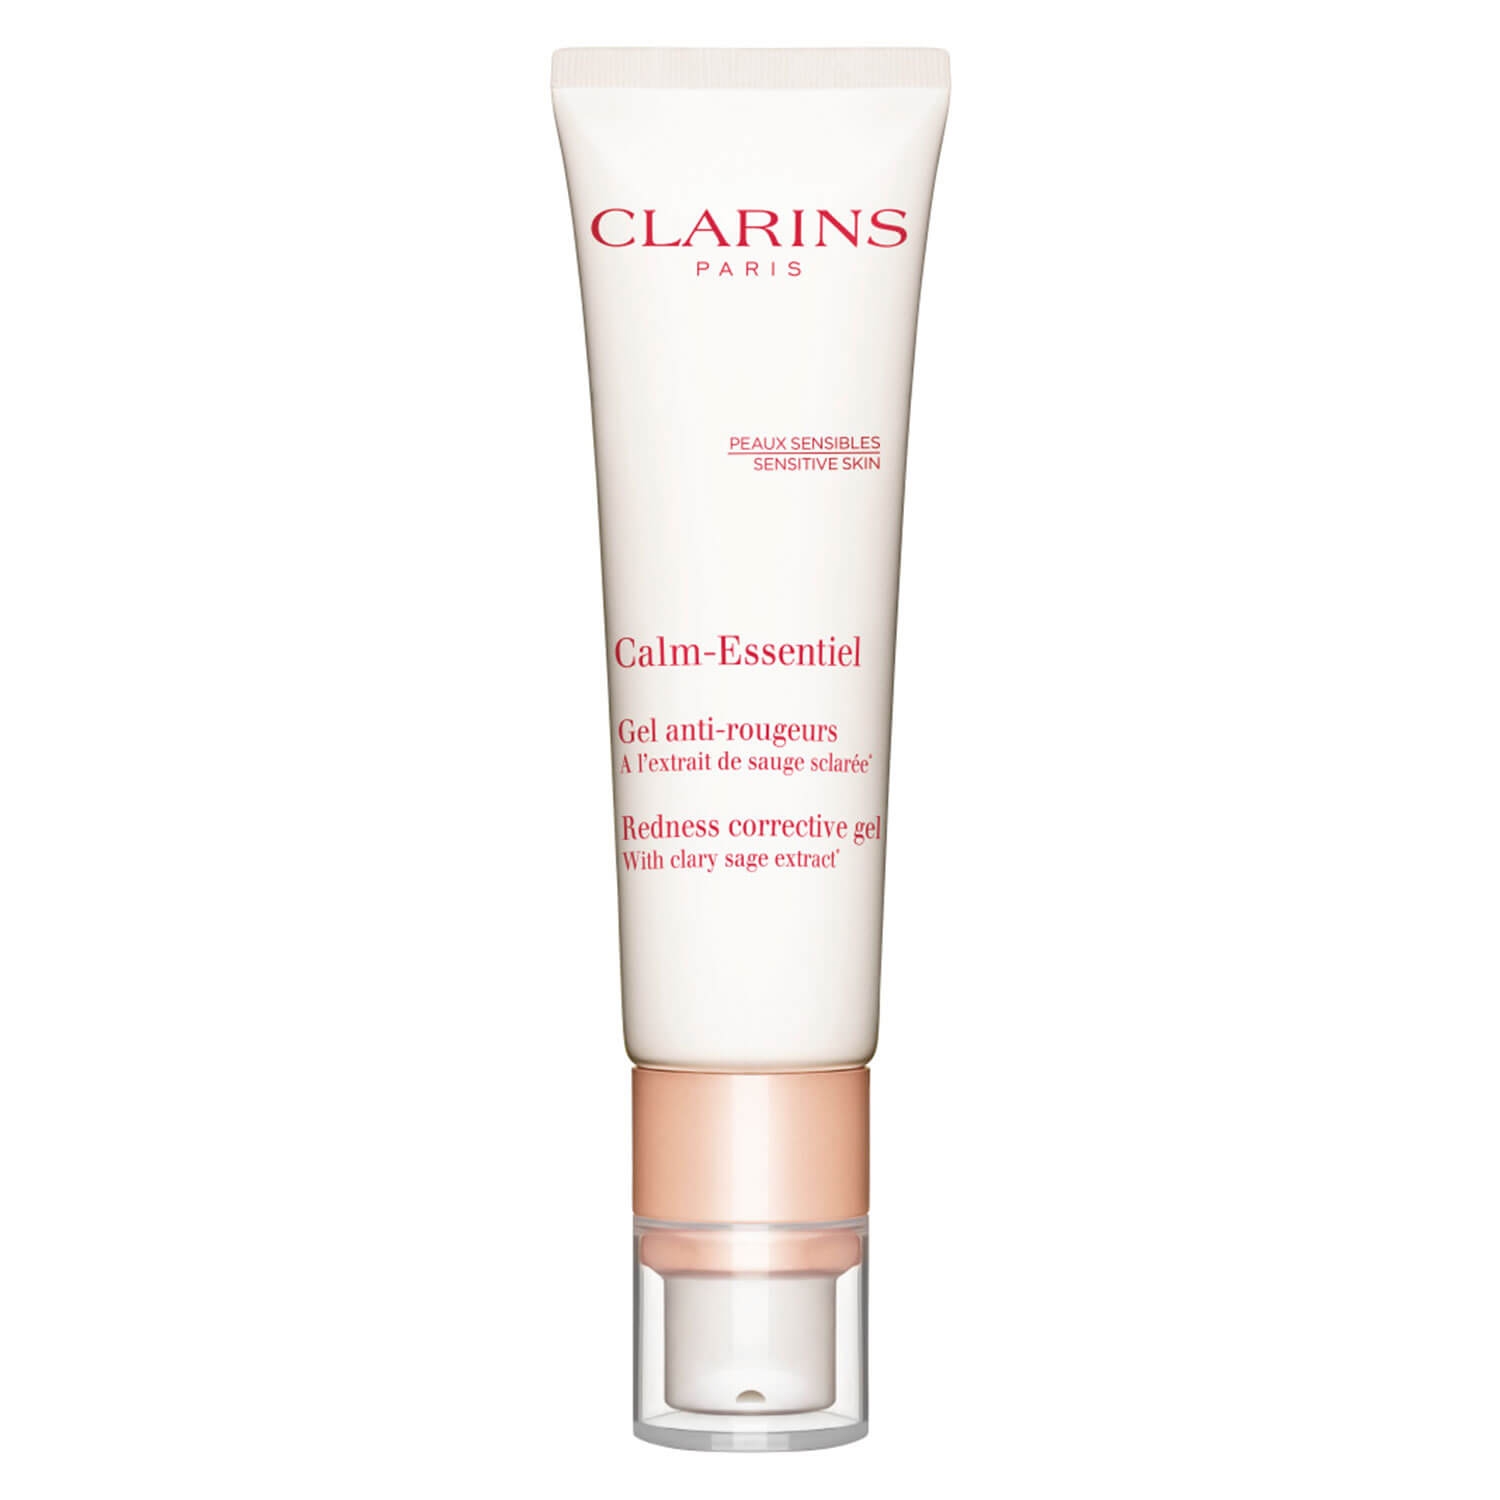 Product image from Clarins Skin - Gel Anti-Rougeurs Calm-Essentiel